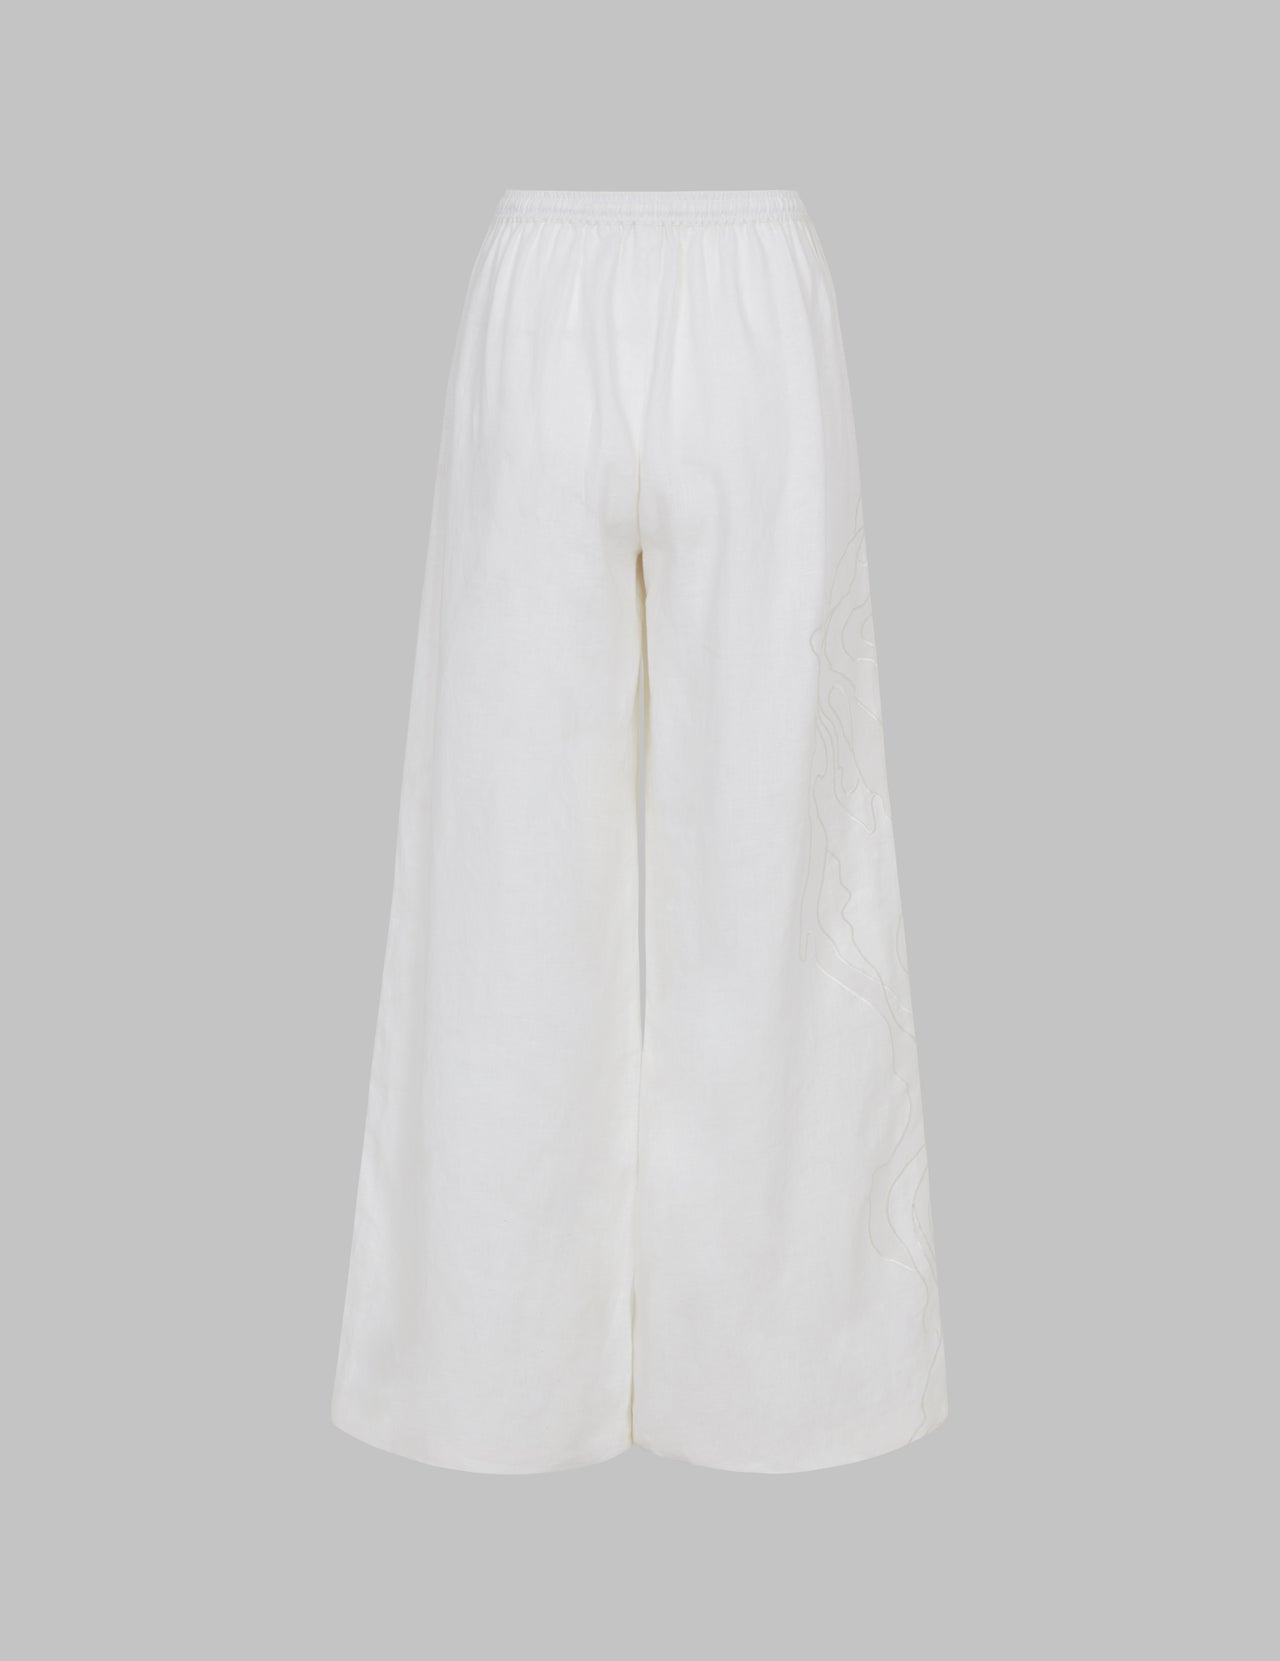  White Linen Drawstring Wide Leg Trousers with Cutwork Appliqué 